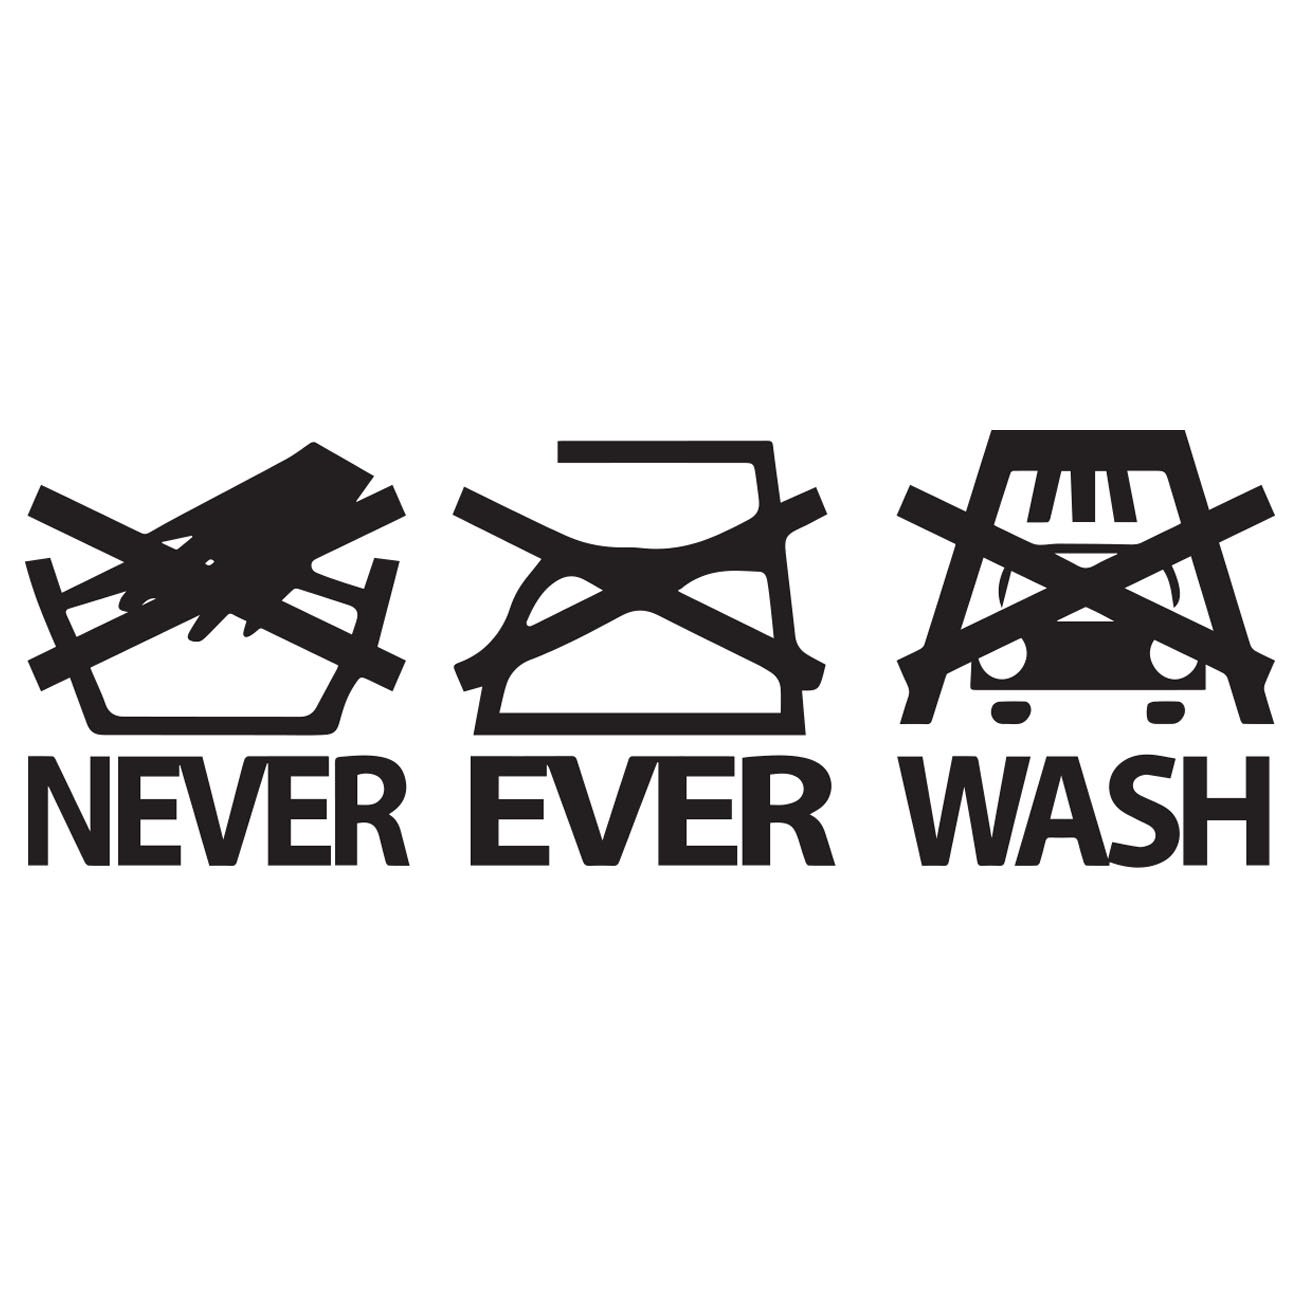 Never ever wash